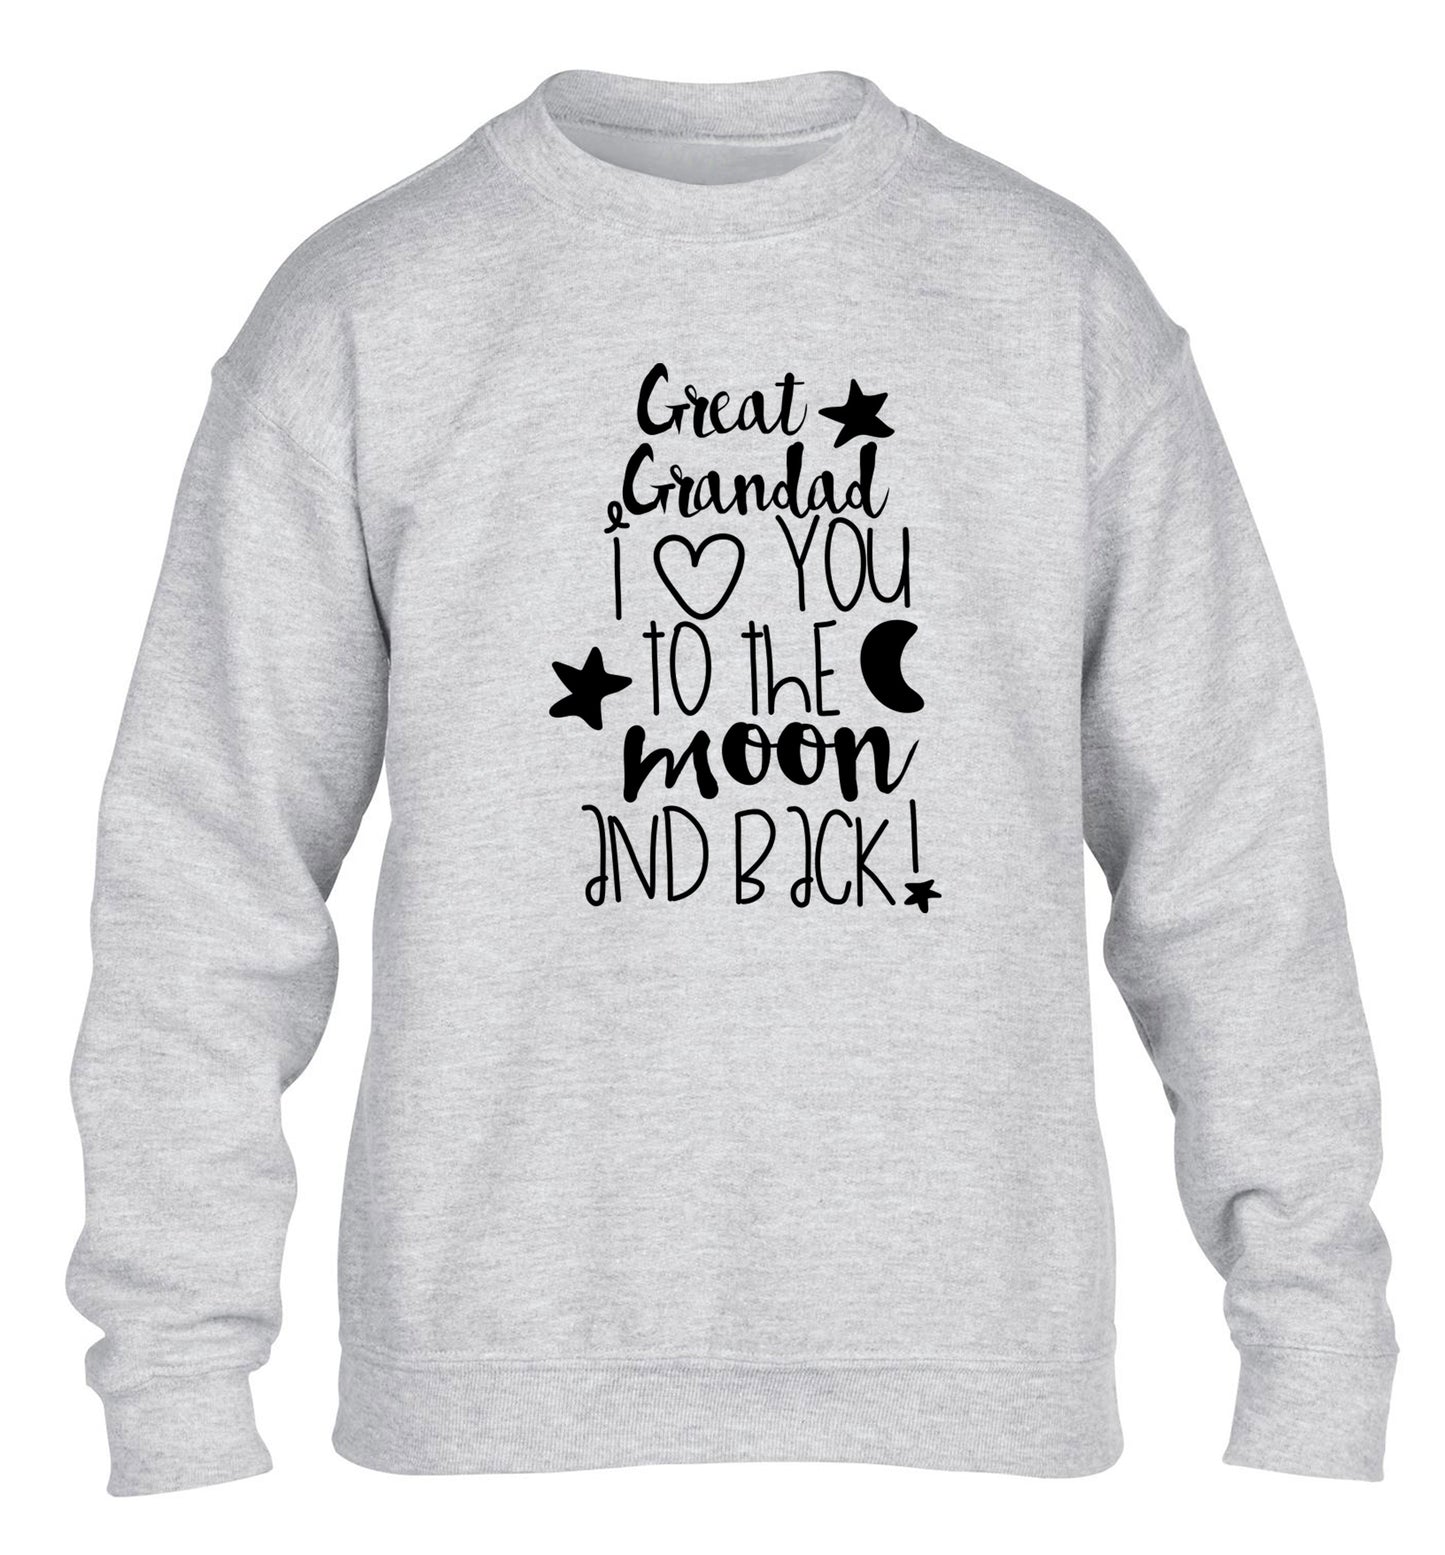 Great Grandad I love you to the moon and back children's grey  sweater 12-14 Years